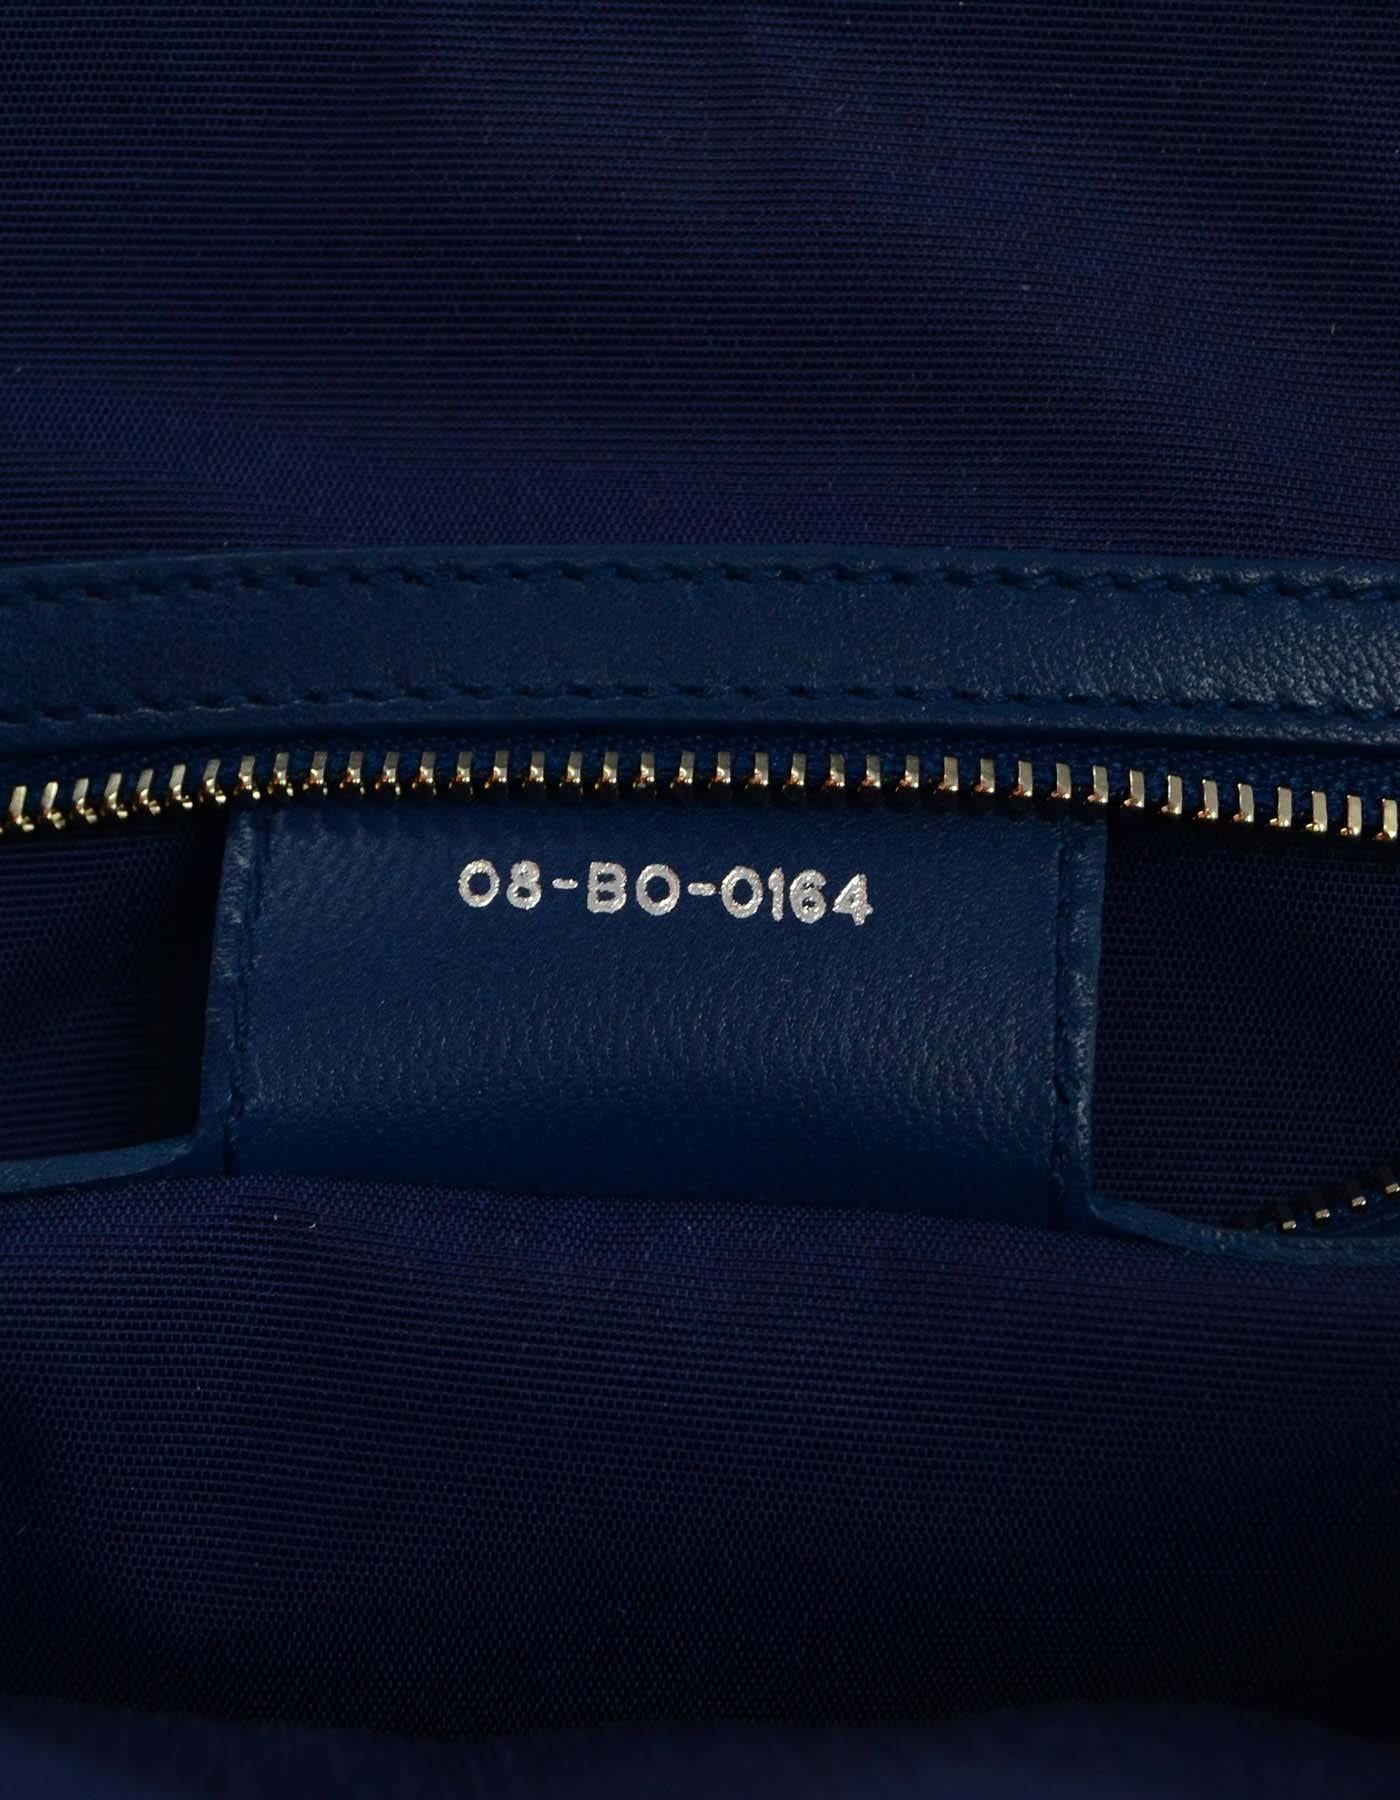 Christian Dior Marine Blue Cannage Quilted Soft Leather Zipper Shopping Tote Bag 3